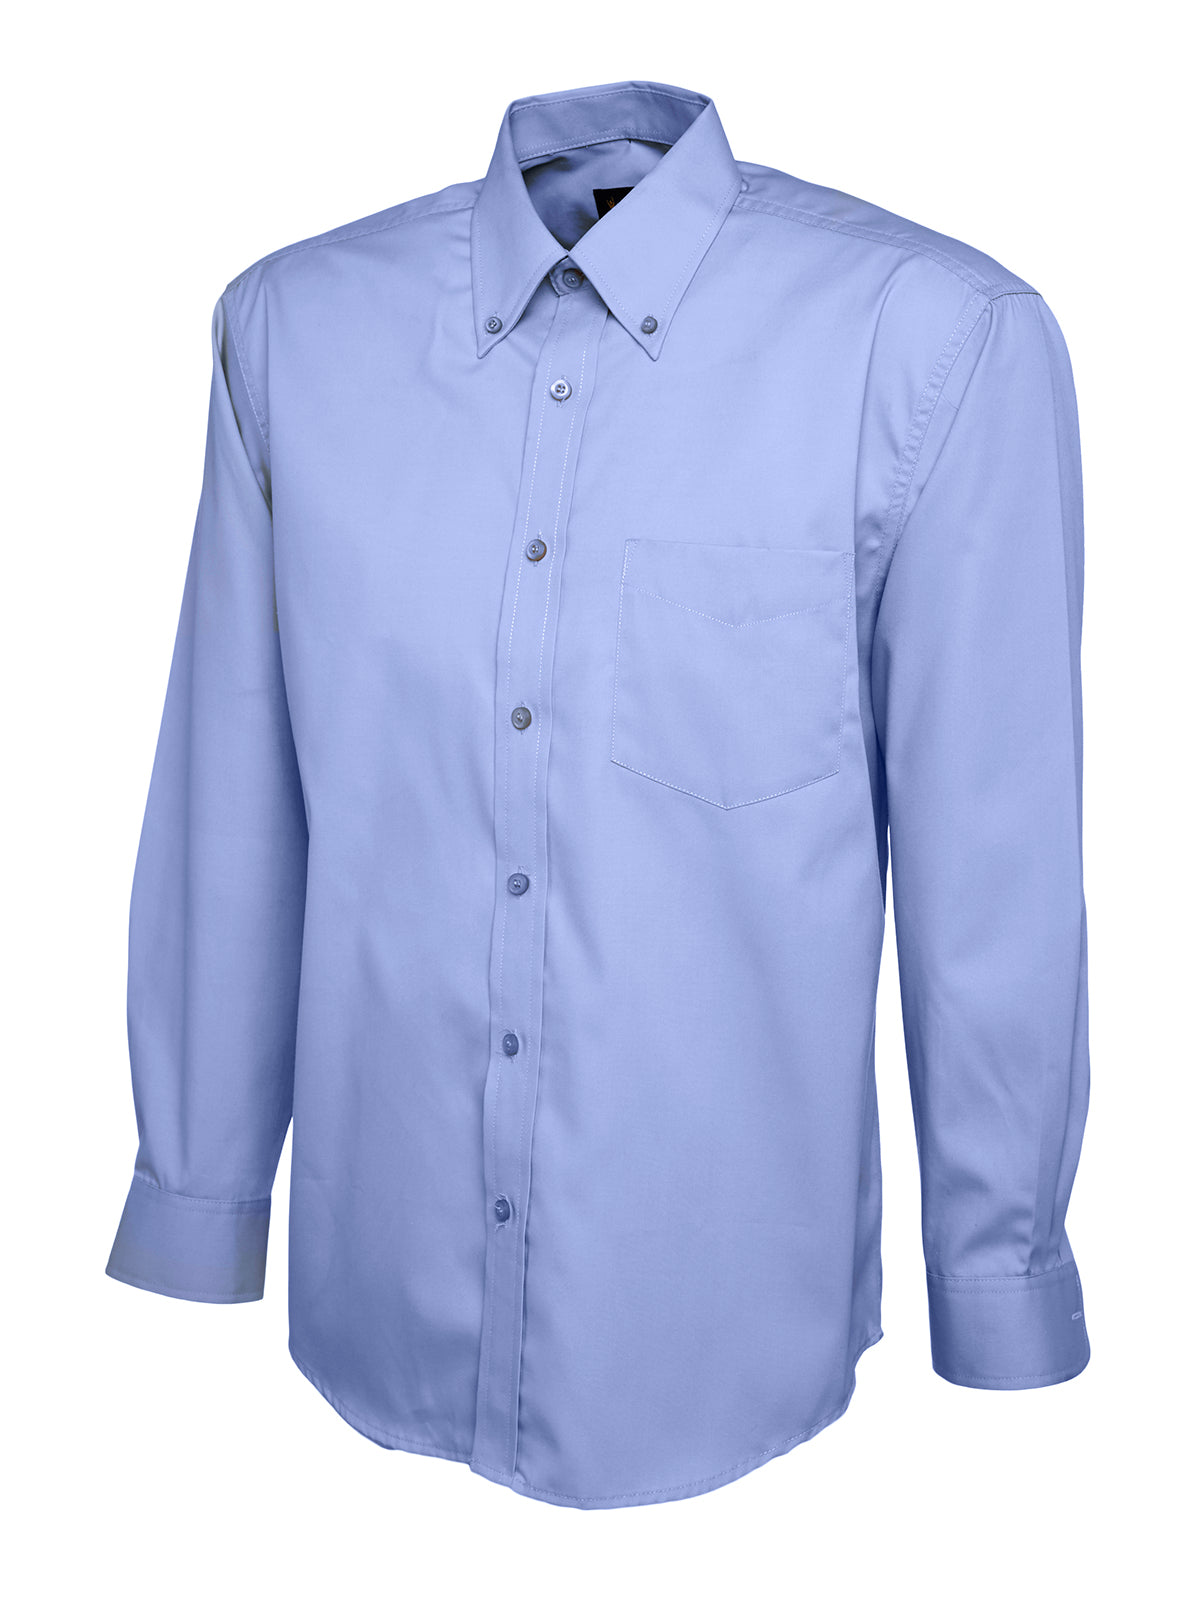 mens_pinpoint_oxford_full_sleeve_shirt_mid_blue